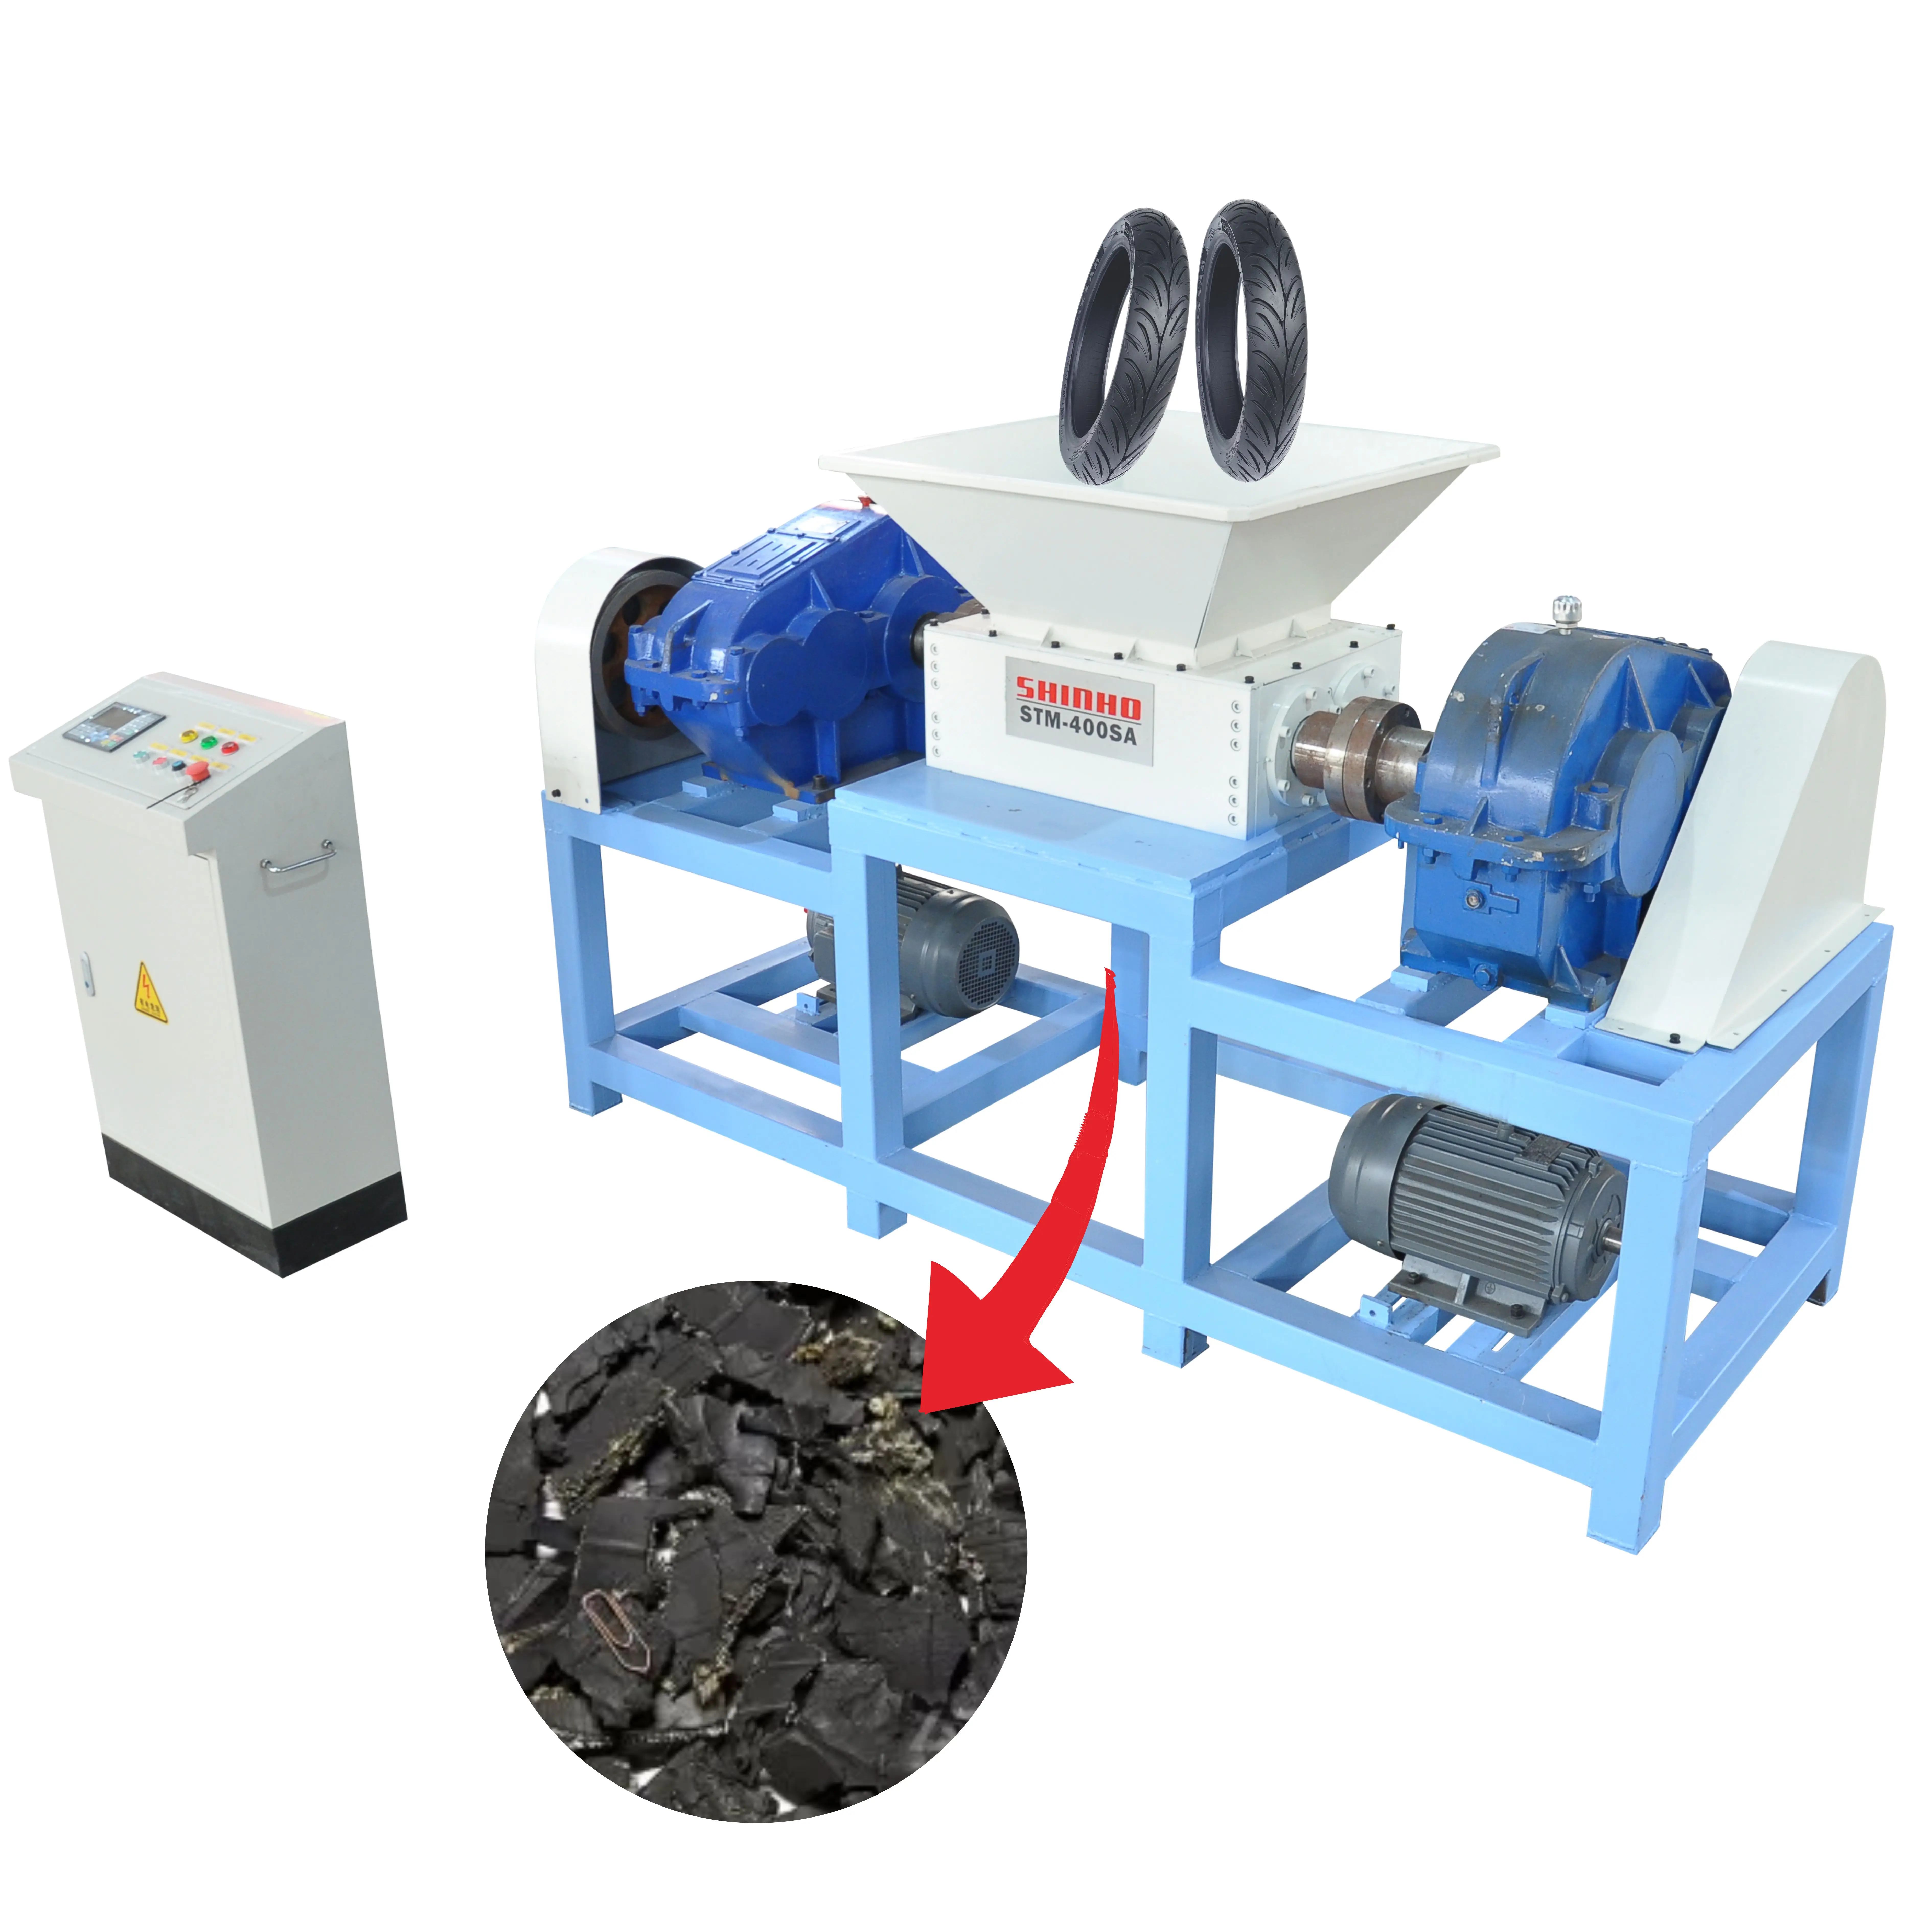 Shinho Automatic Car Popular Pure Granule Recycle Peeling Stripper Used Crushing Cable Granulator Copper Wire Recycling Machine